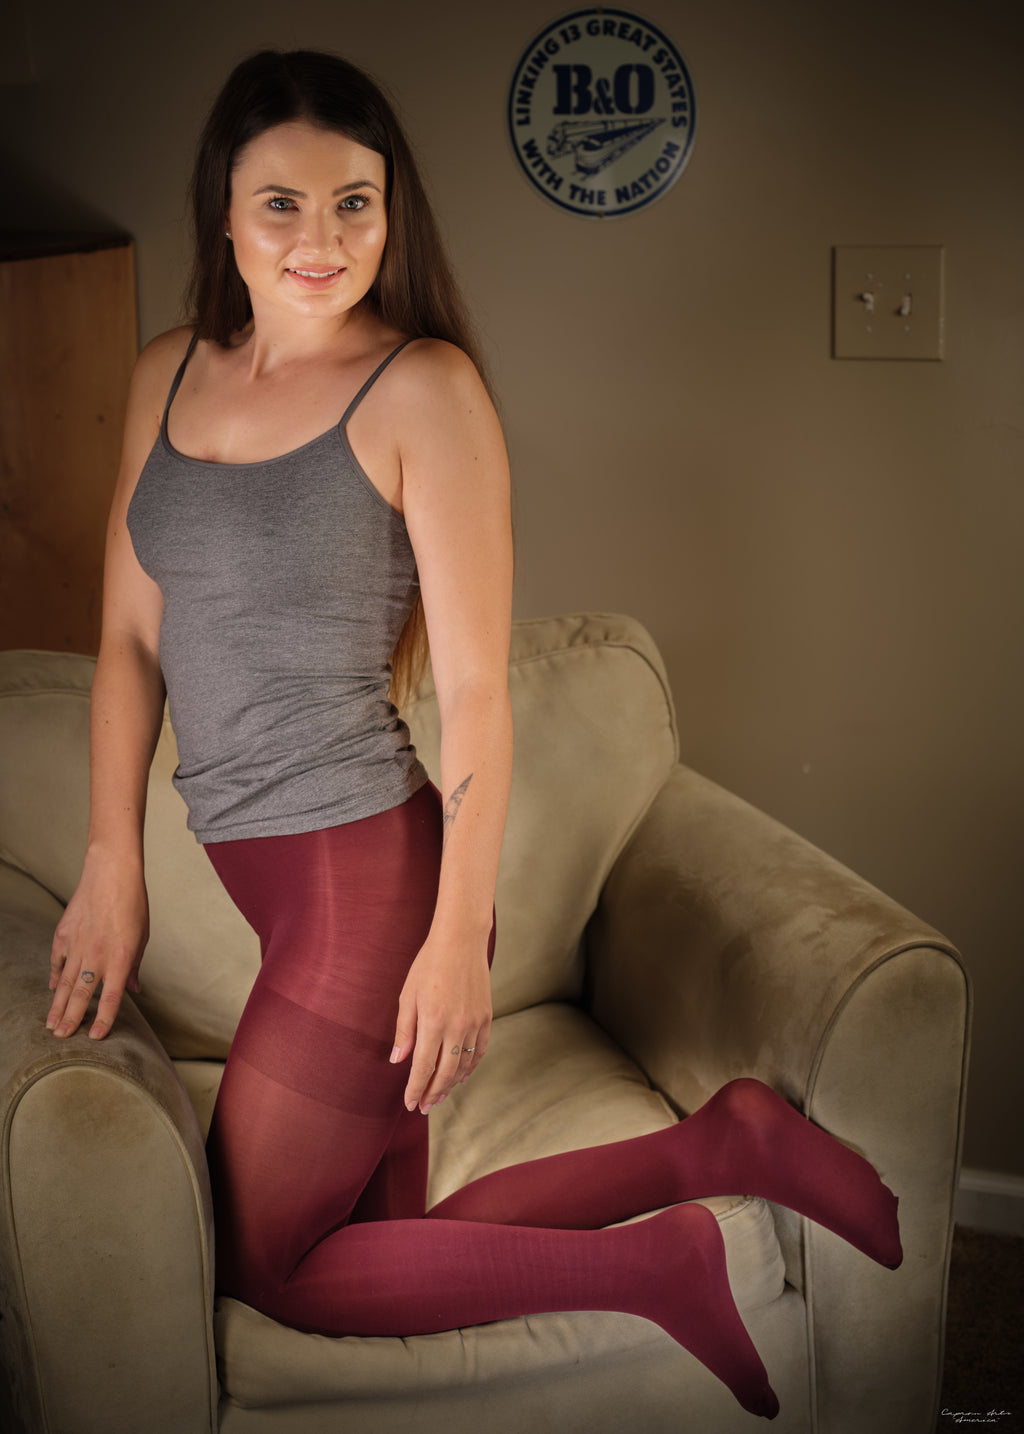 Celeste's Maroon Pantyhose and grey tank top from the 'Celeste in Kastanove' Session